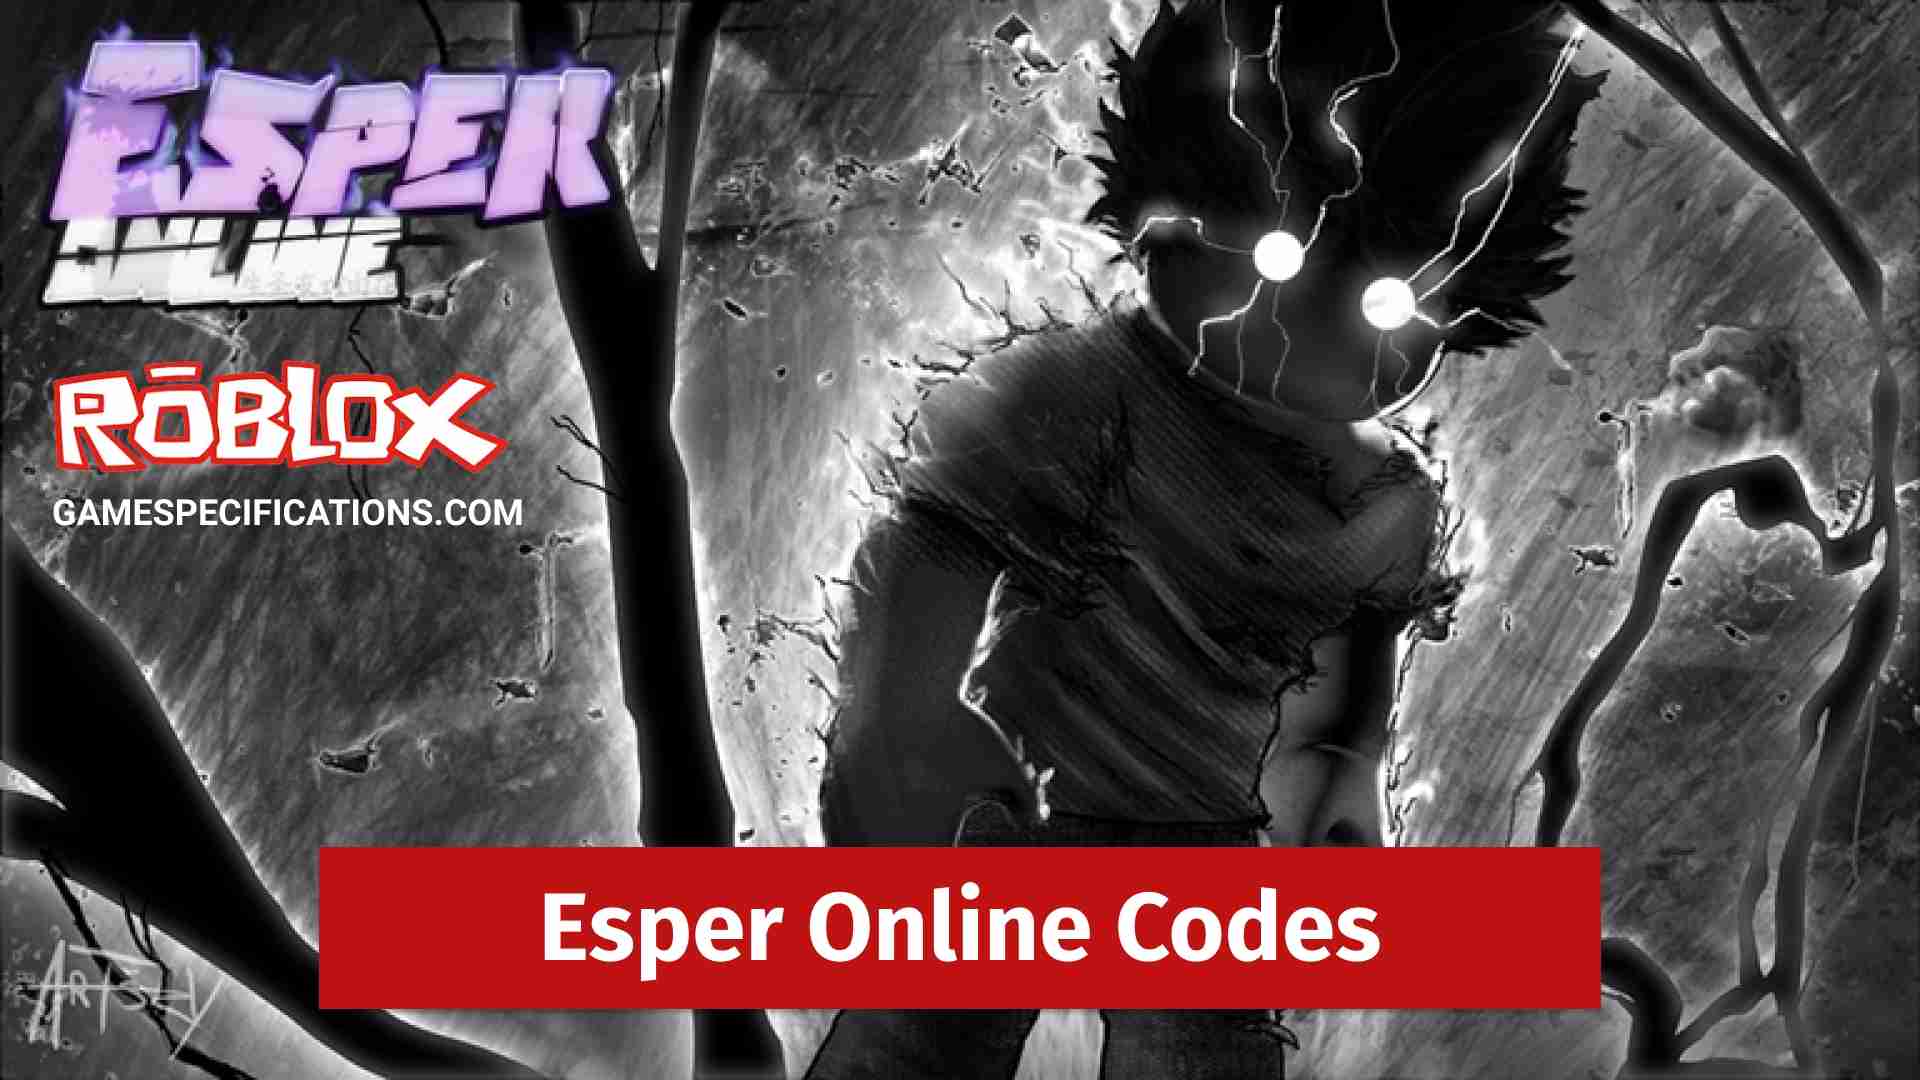 Roblox Esper Online Codes July 2021 Game Specifications - roblox old currency discontinued